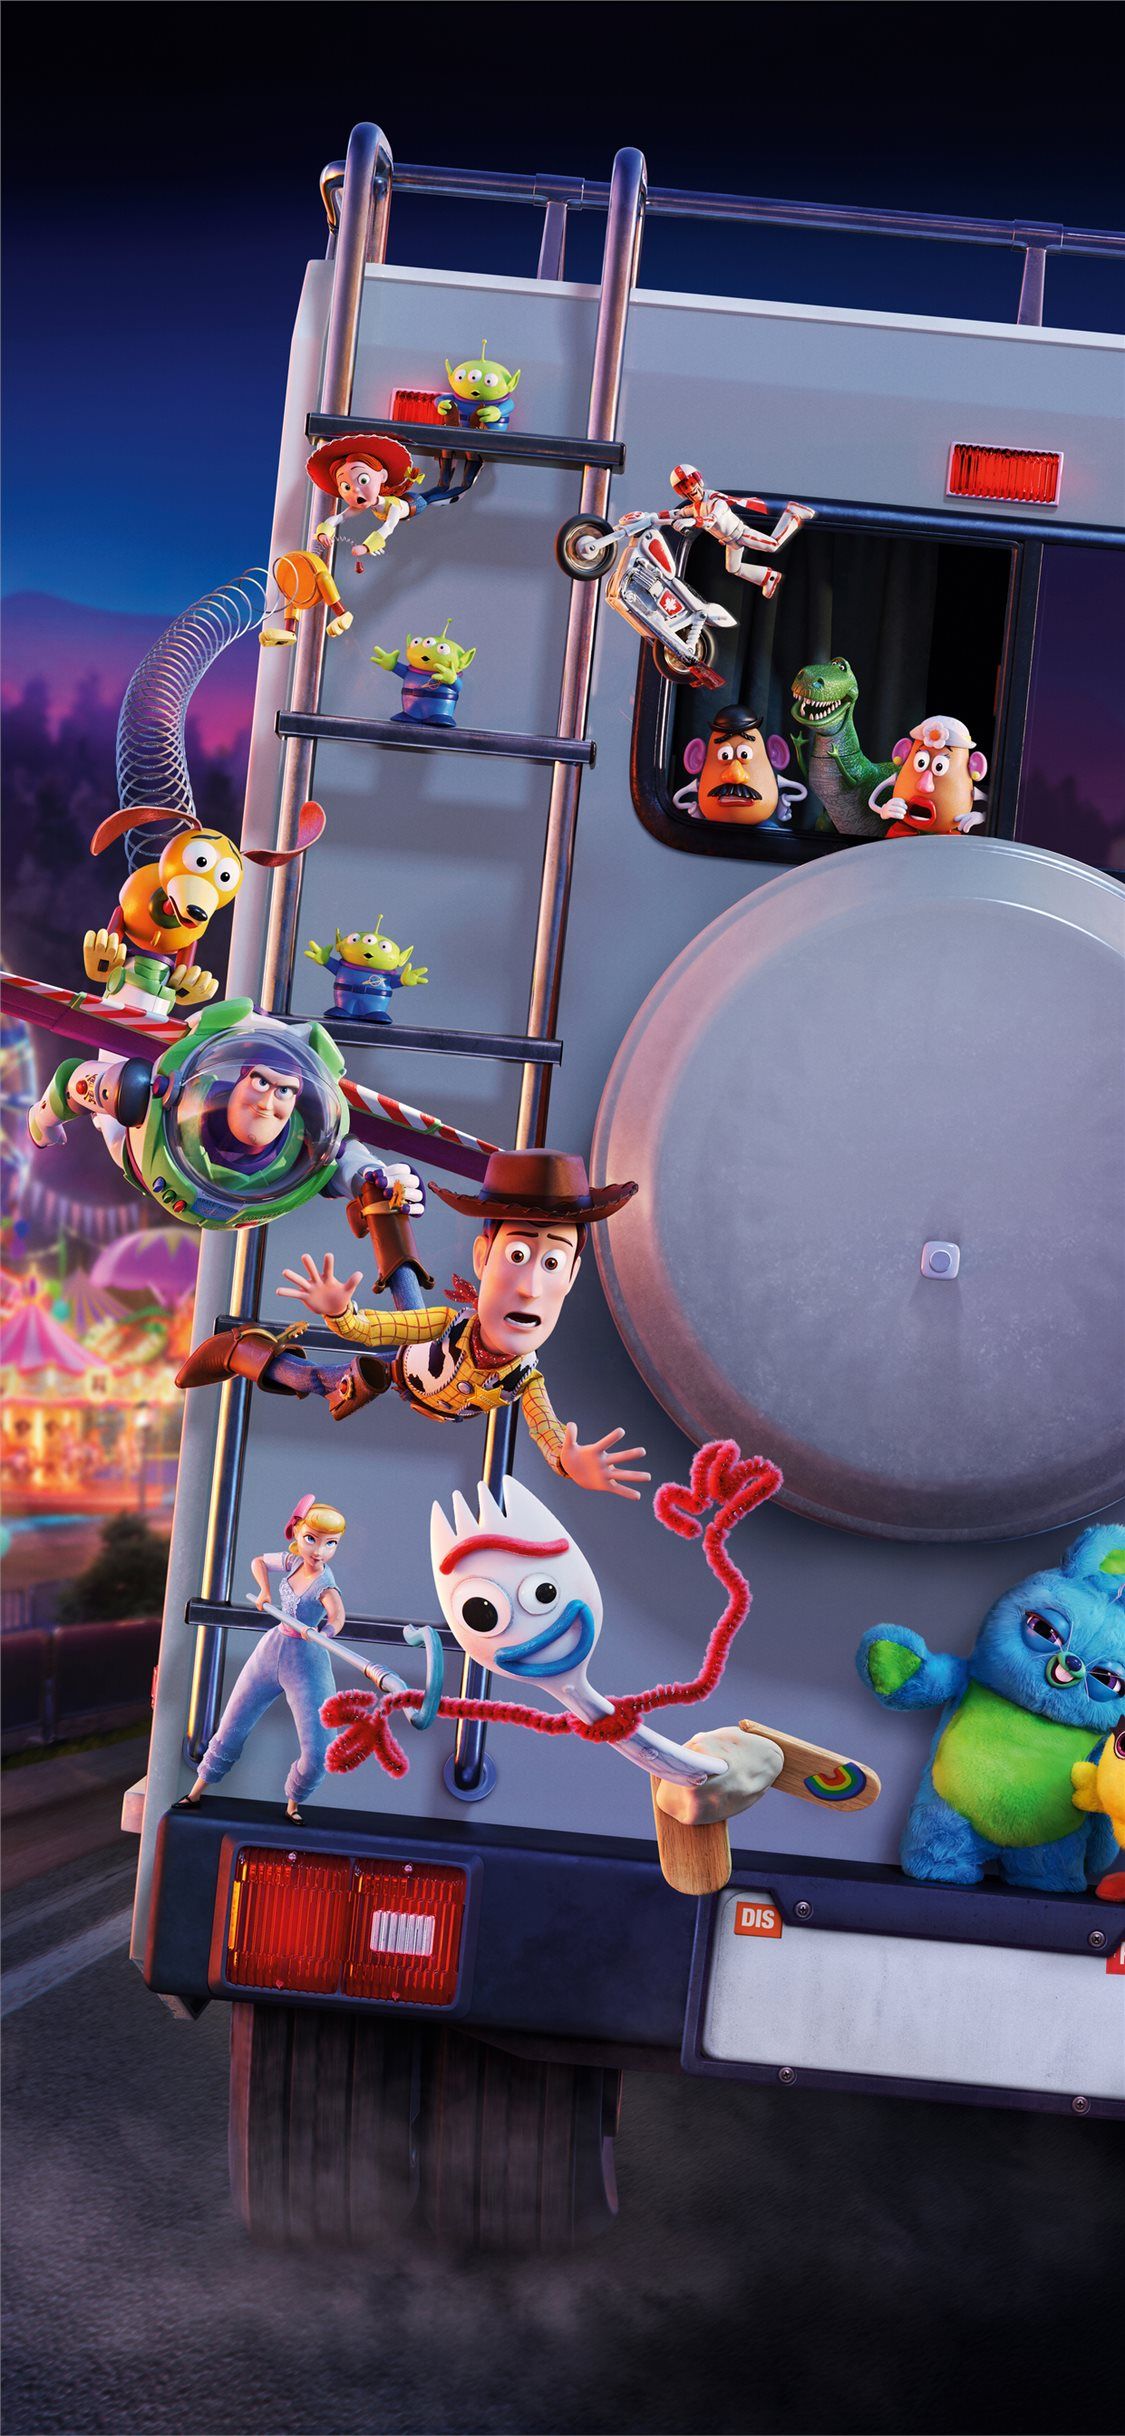 toy story 4 5k iPhone X Wallpaper Free Download